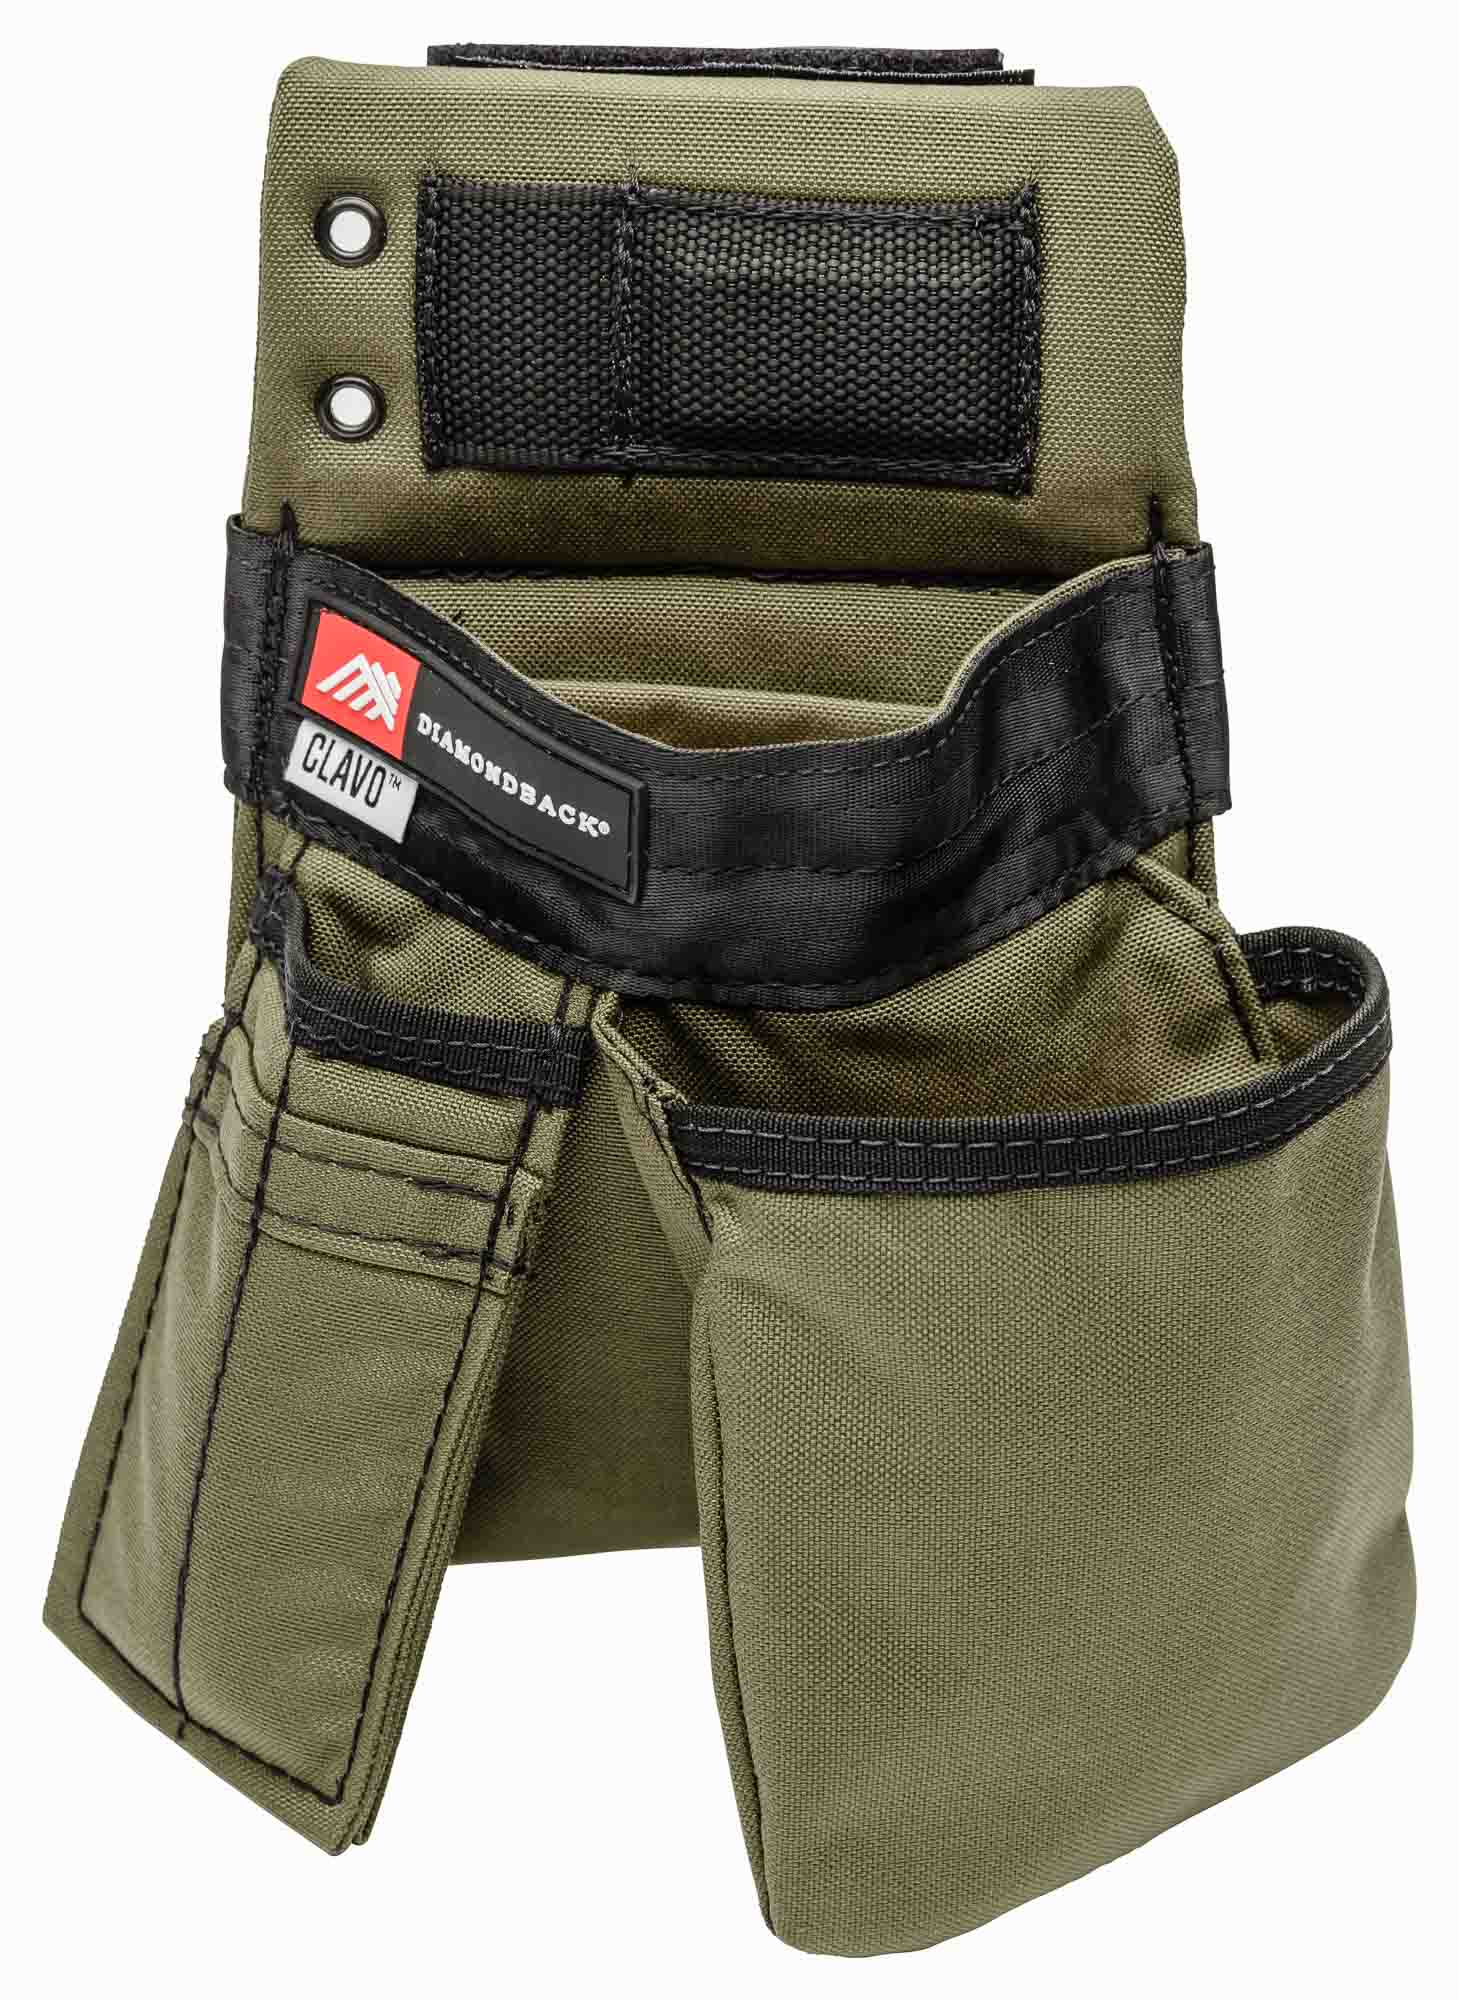 Clavo 2-Pocket 3-Slot Tool Pouch